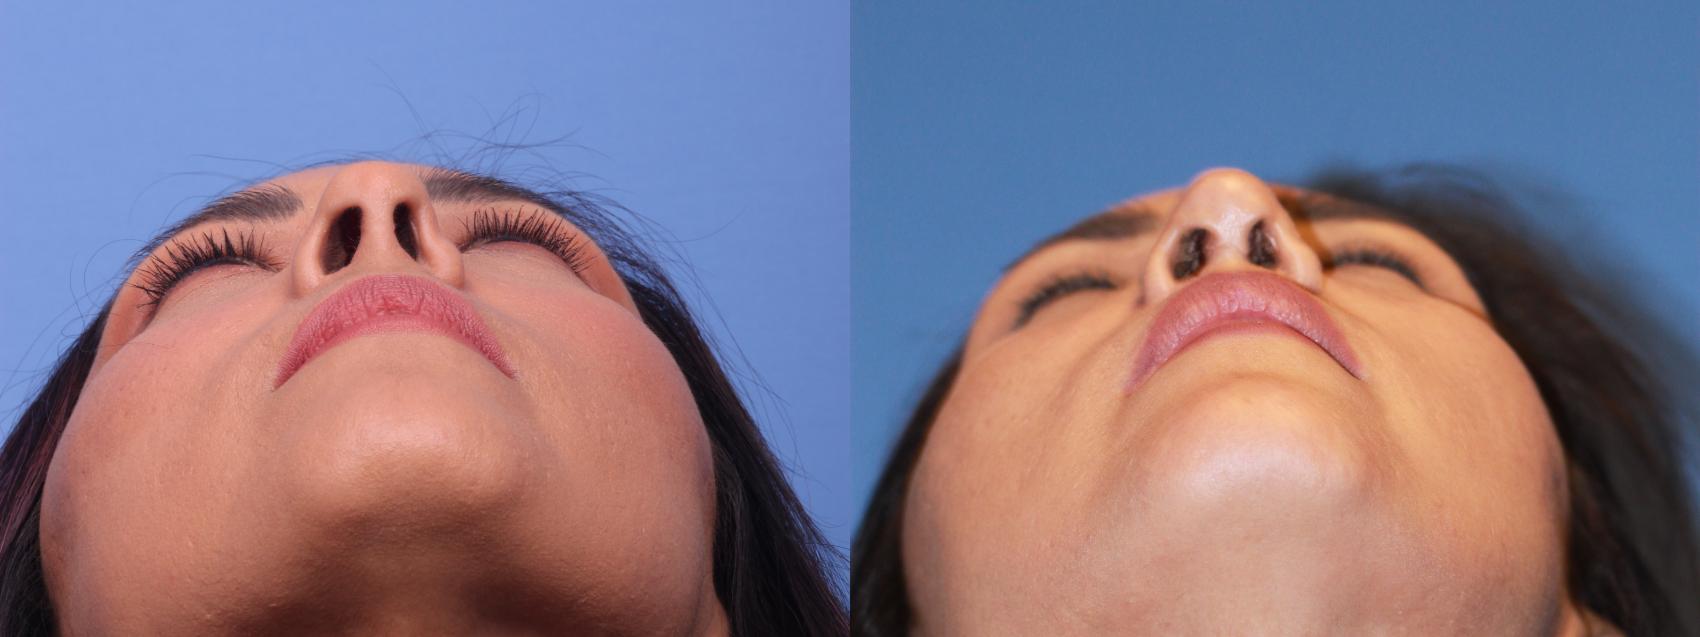 Rhinoplasty Revision Before & After Photo | Scottsdale, AZ | Hobgood Facial Plastic Surgery: Todd Hobgood, MD